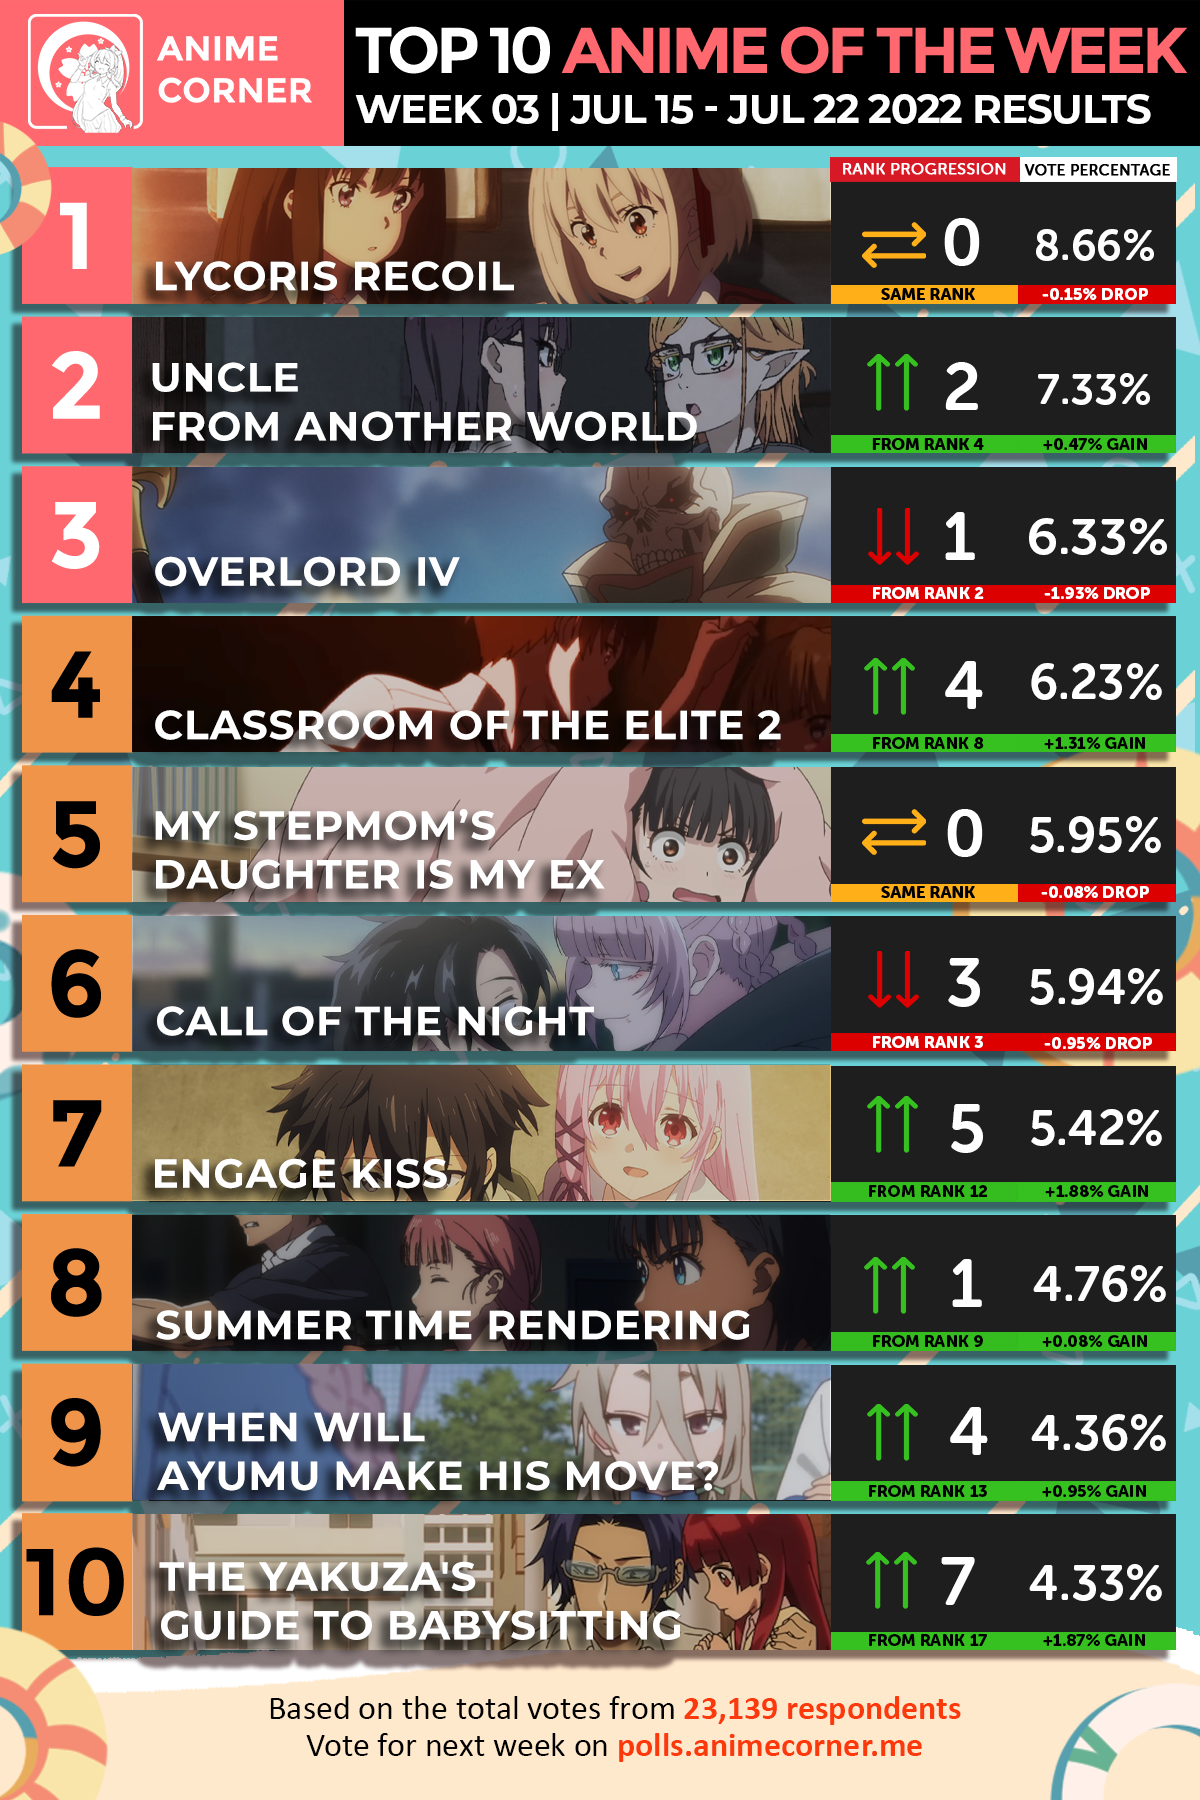 Top 10 Anime of the Week 03 - Summer 2022